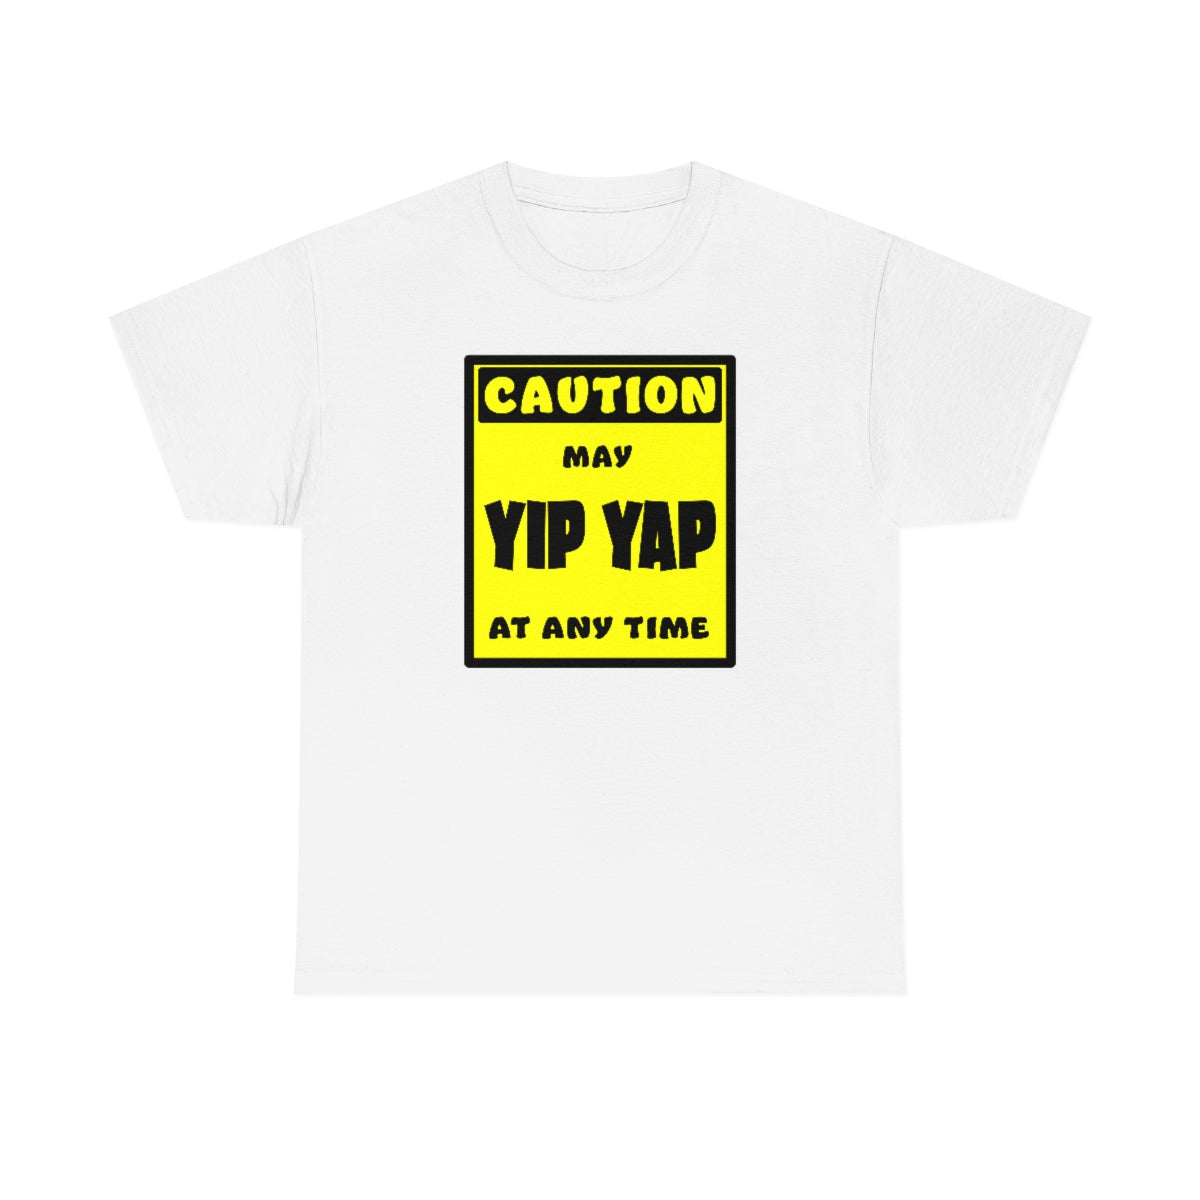 CAUTION! May Yip Yap at any time! - T-Shirt T-Shirt AFLT-Whootorca White S 